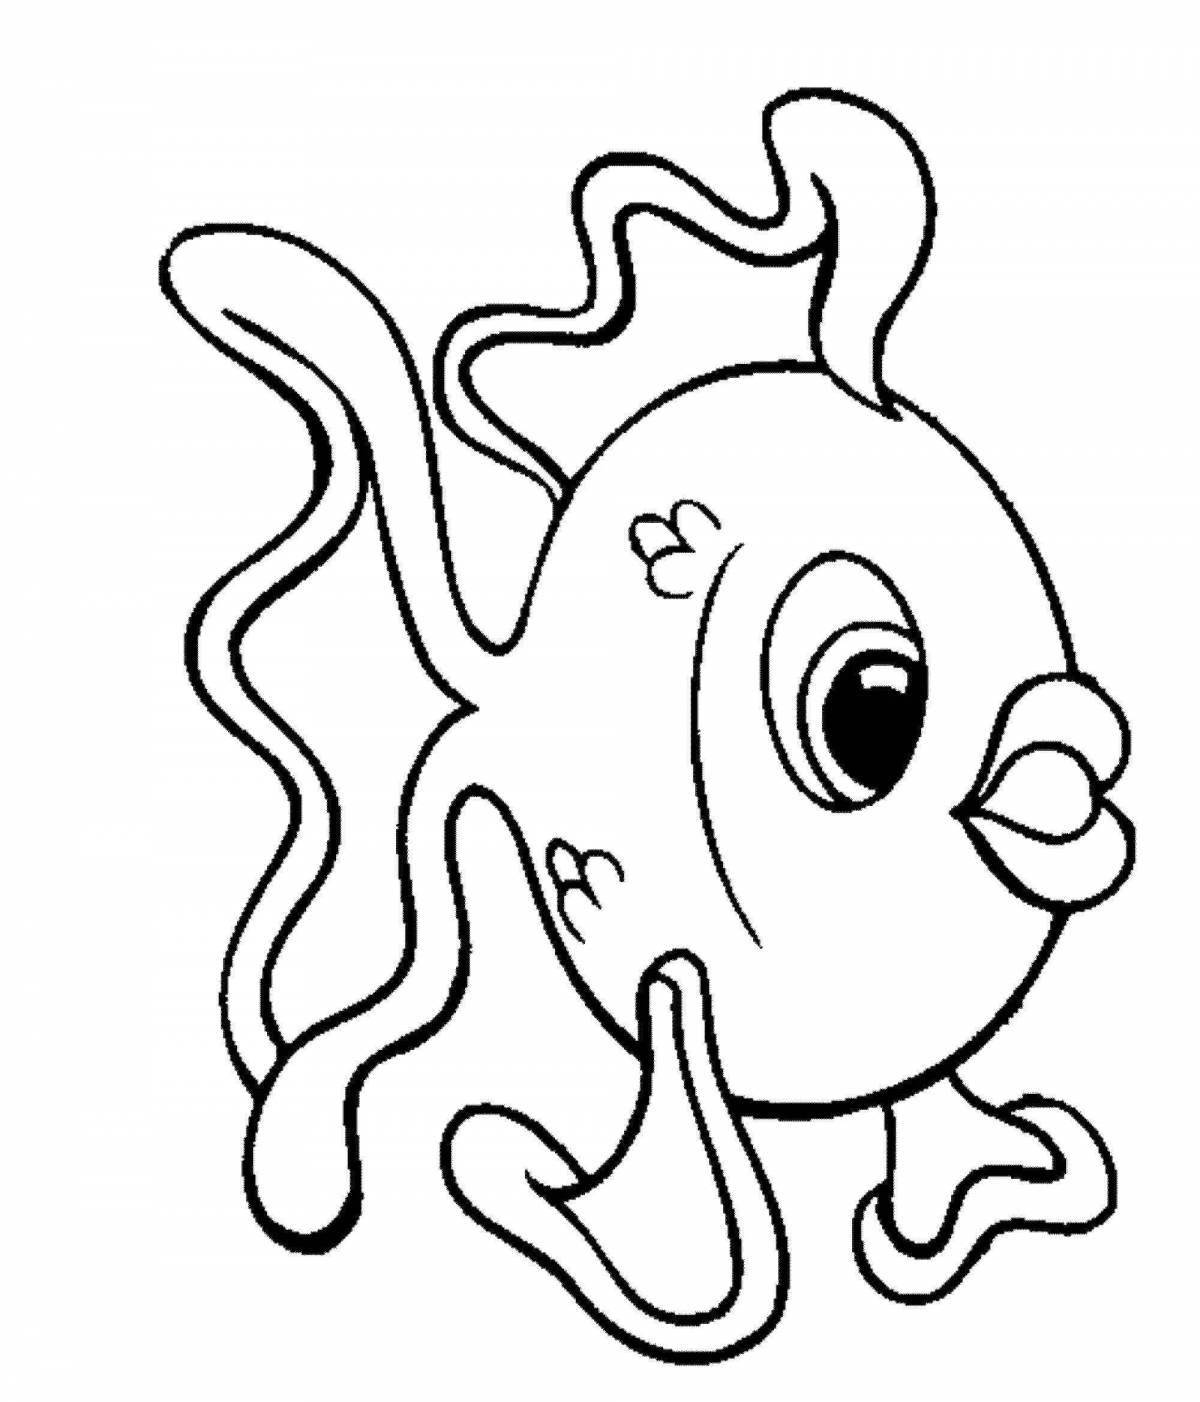 Incredible marine life coloring pages for kids